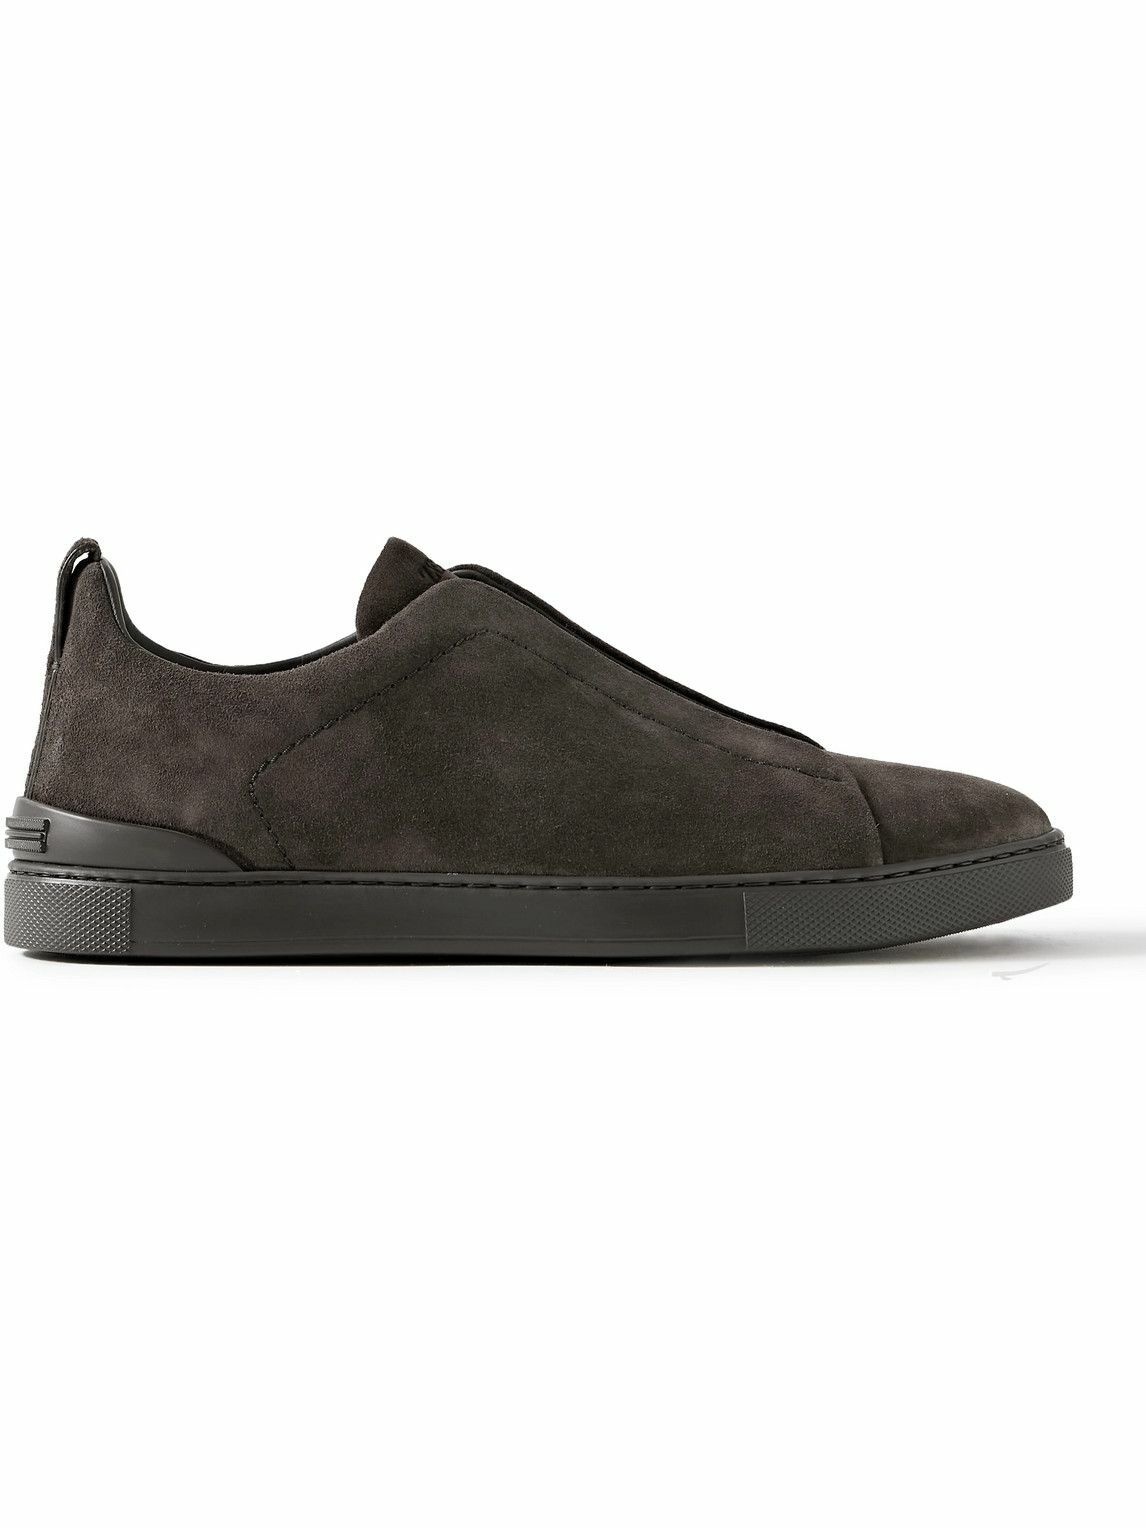 Zegna - Triple Stitch Suede Sneakers - Brown Zegna